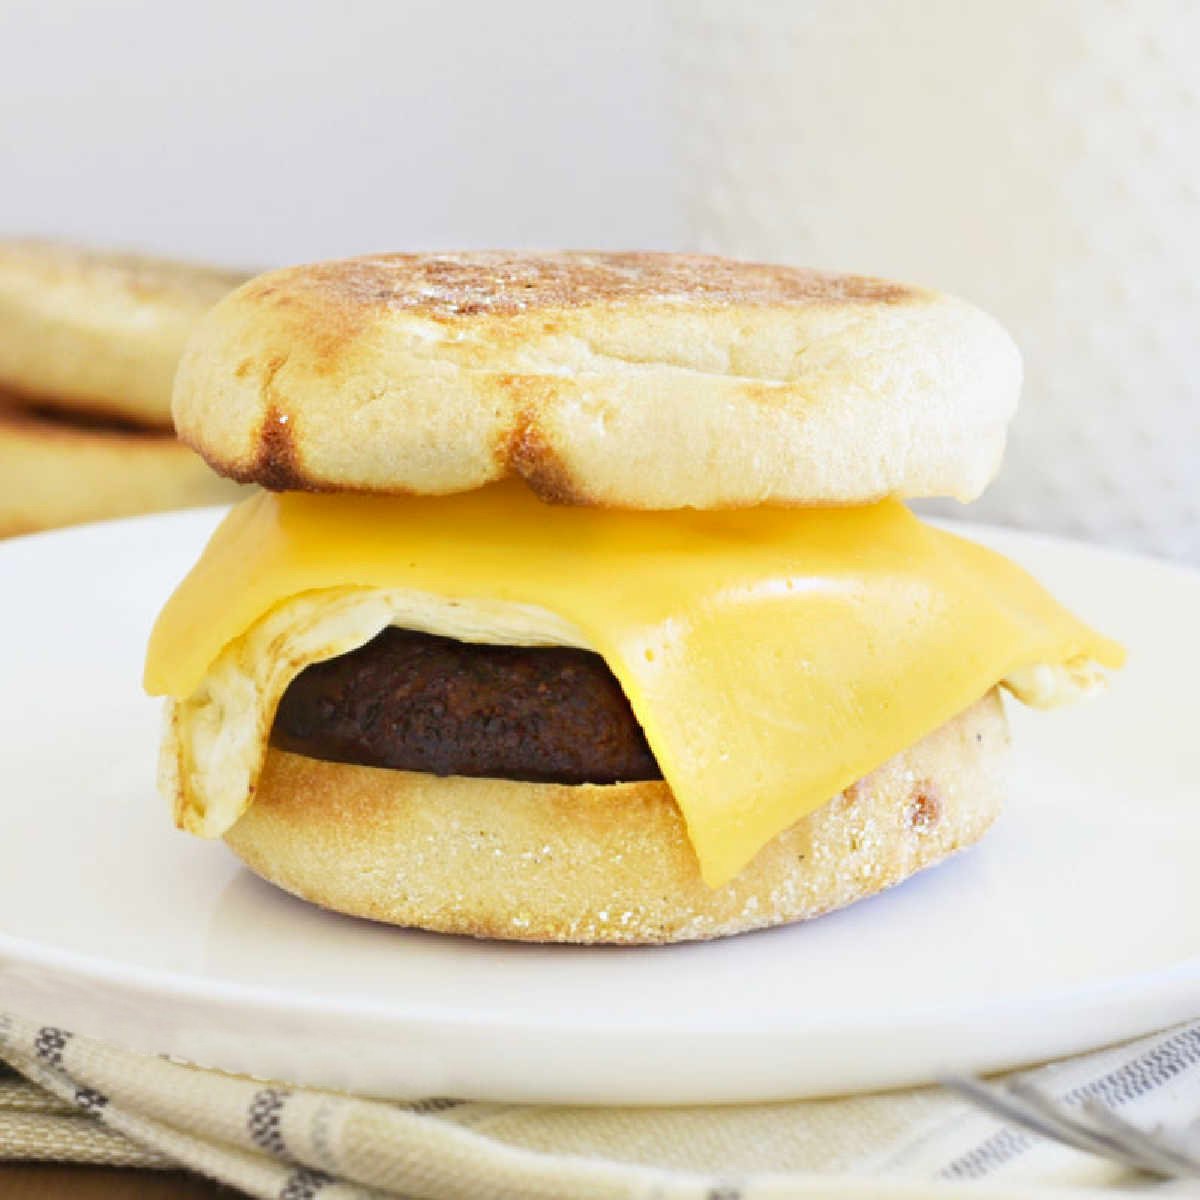 https://www.meatloafandmelodrama.com/wp-content/uploads/2022/04/sausage-egg-and-cheese-breakfast-sandwich-square.jpeg